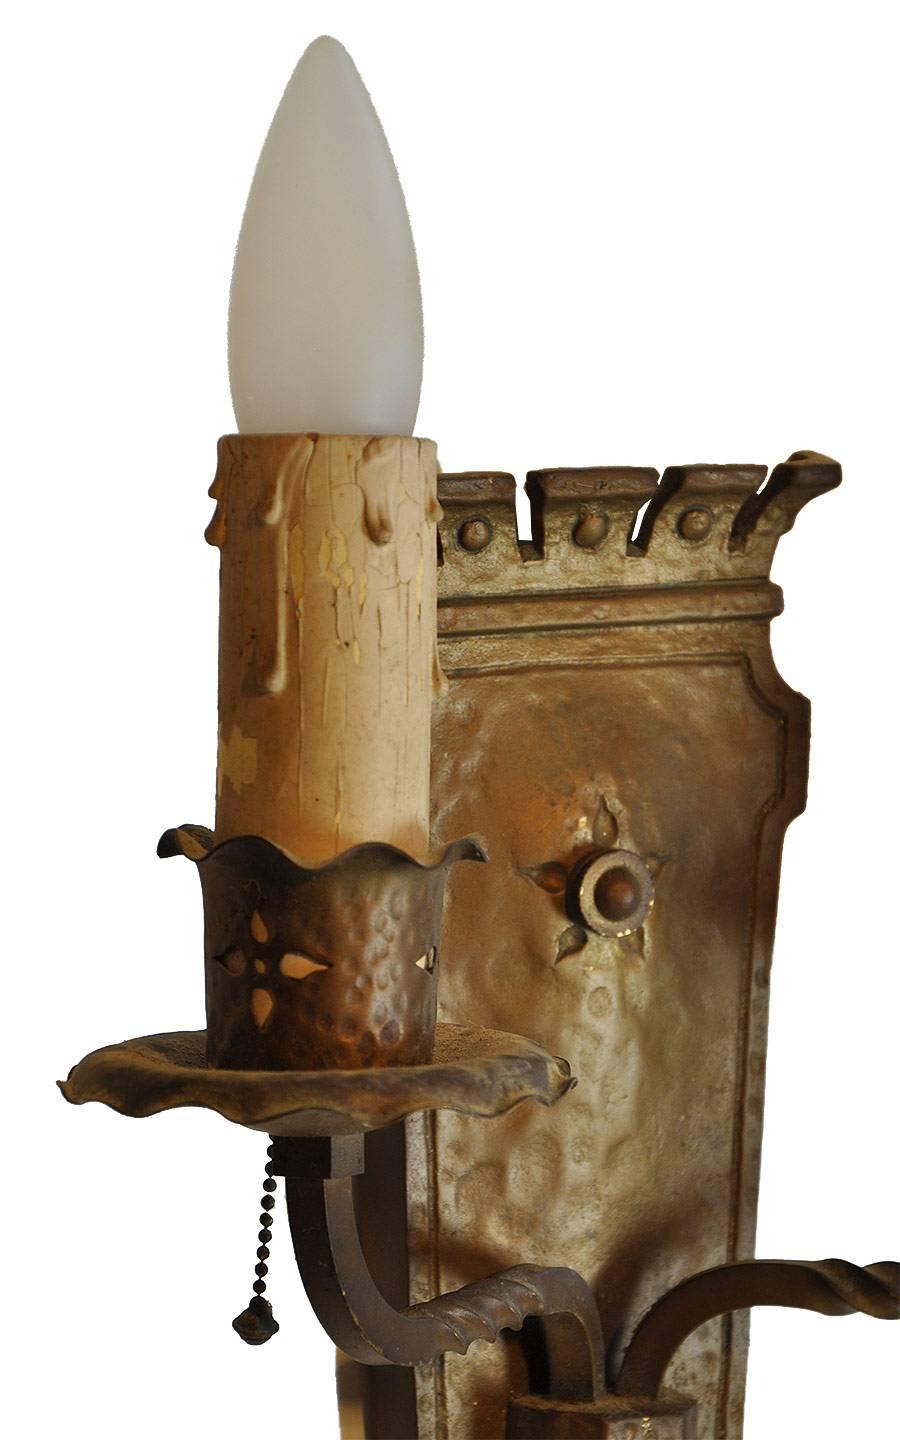 Hammered bronze interior two-candle sconce with twisted metal detailing throughout and decorative cut-out floral designs on the candle holders.
We have two available for purchase.

We find that early antique lighting was designed as objects of